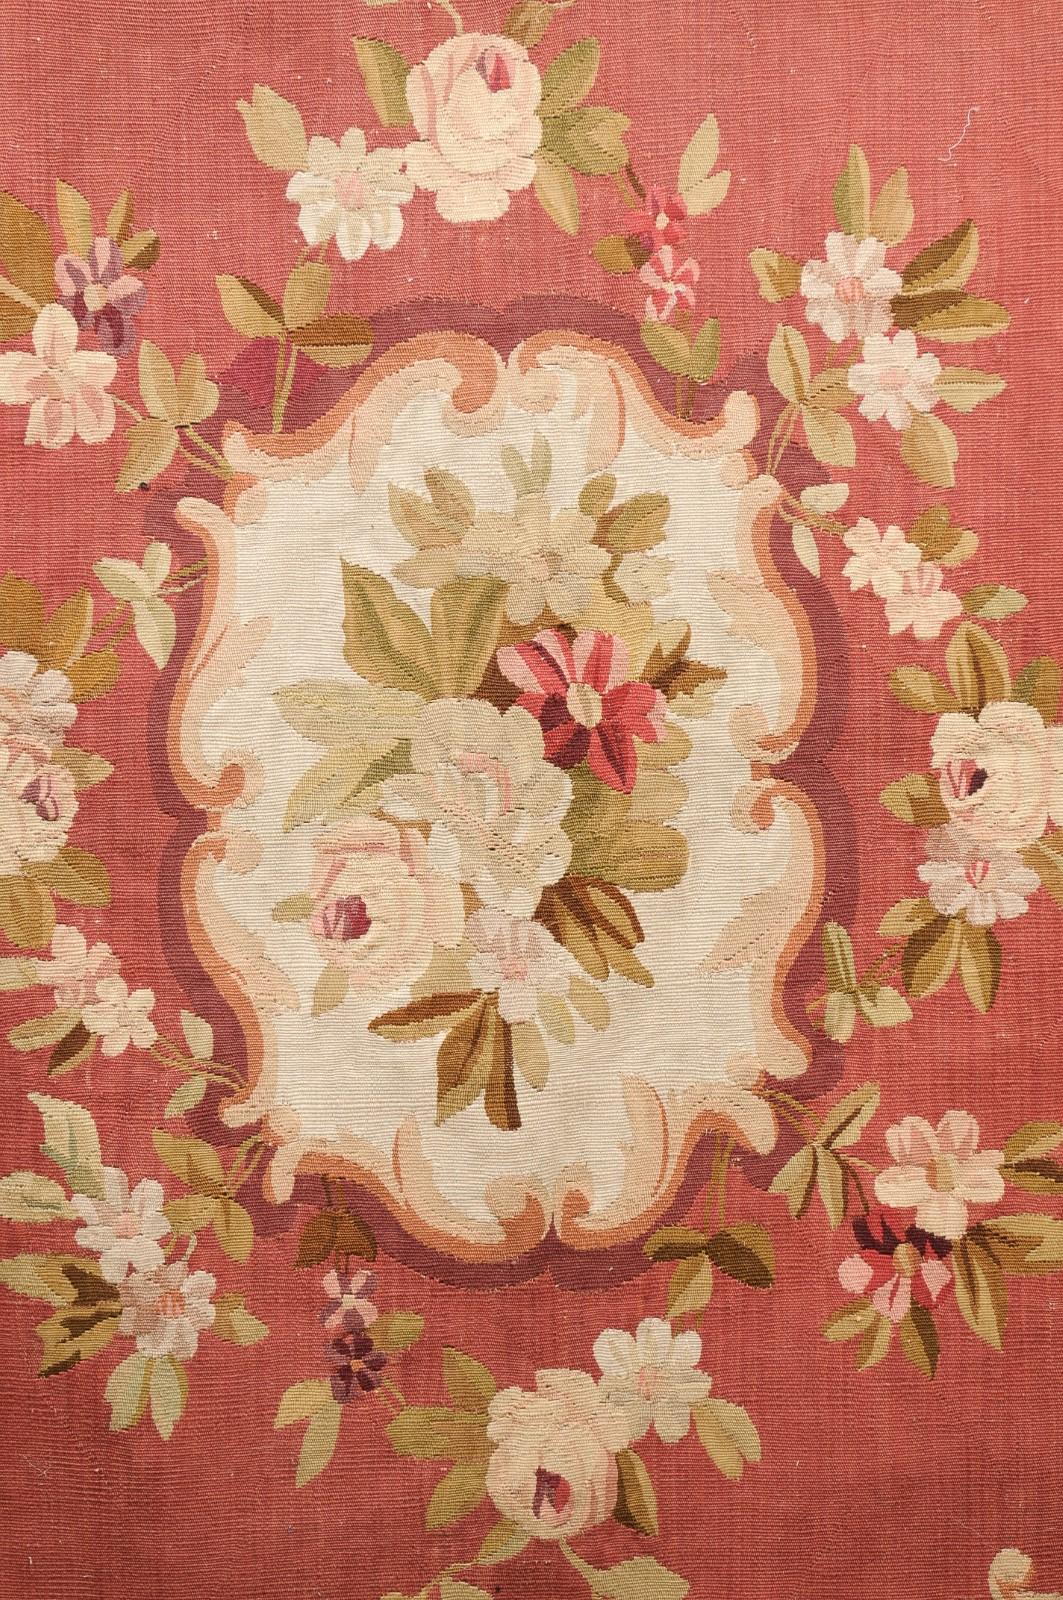 French 19th Century Red and Soft Green Aubusson Tapestry with Floral Décor For Sale 2